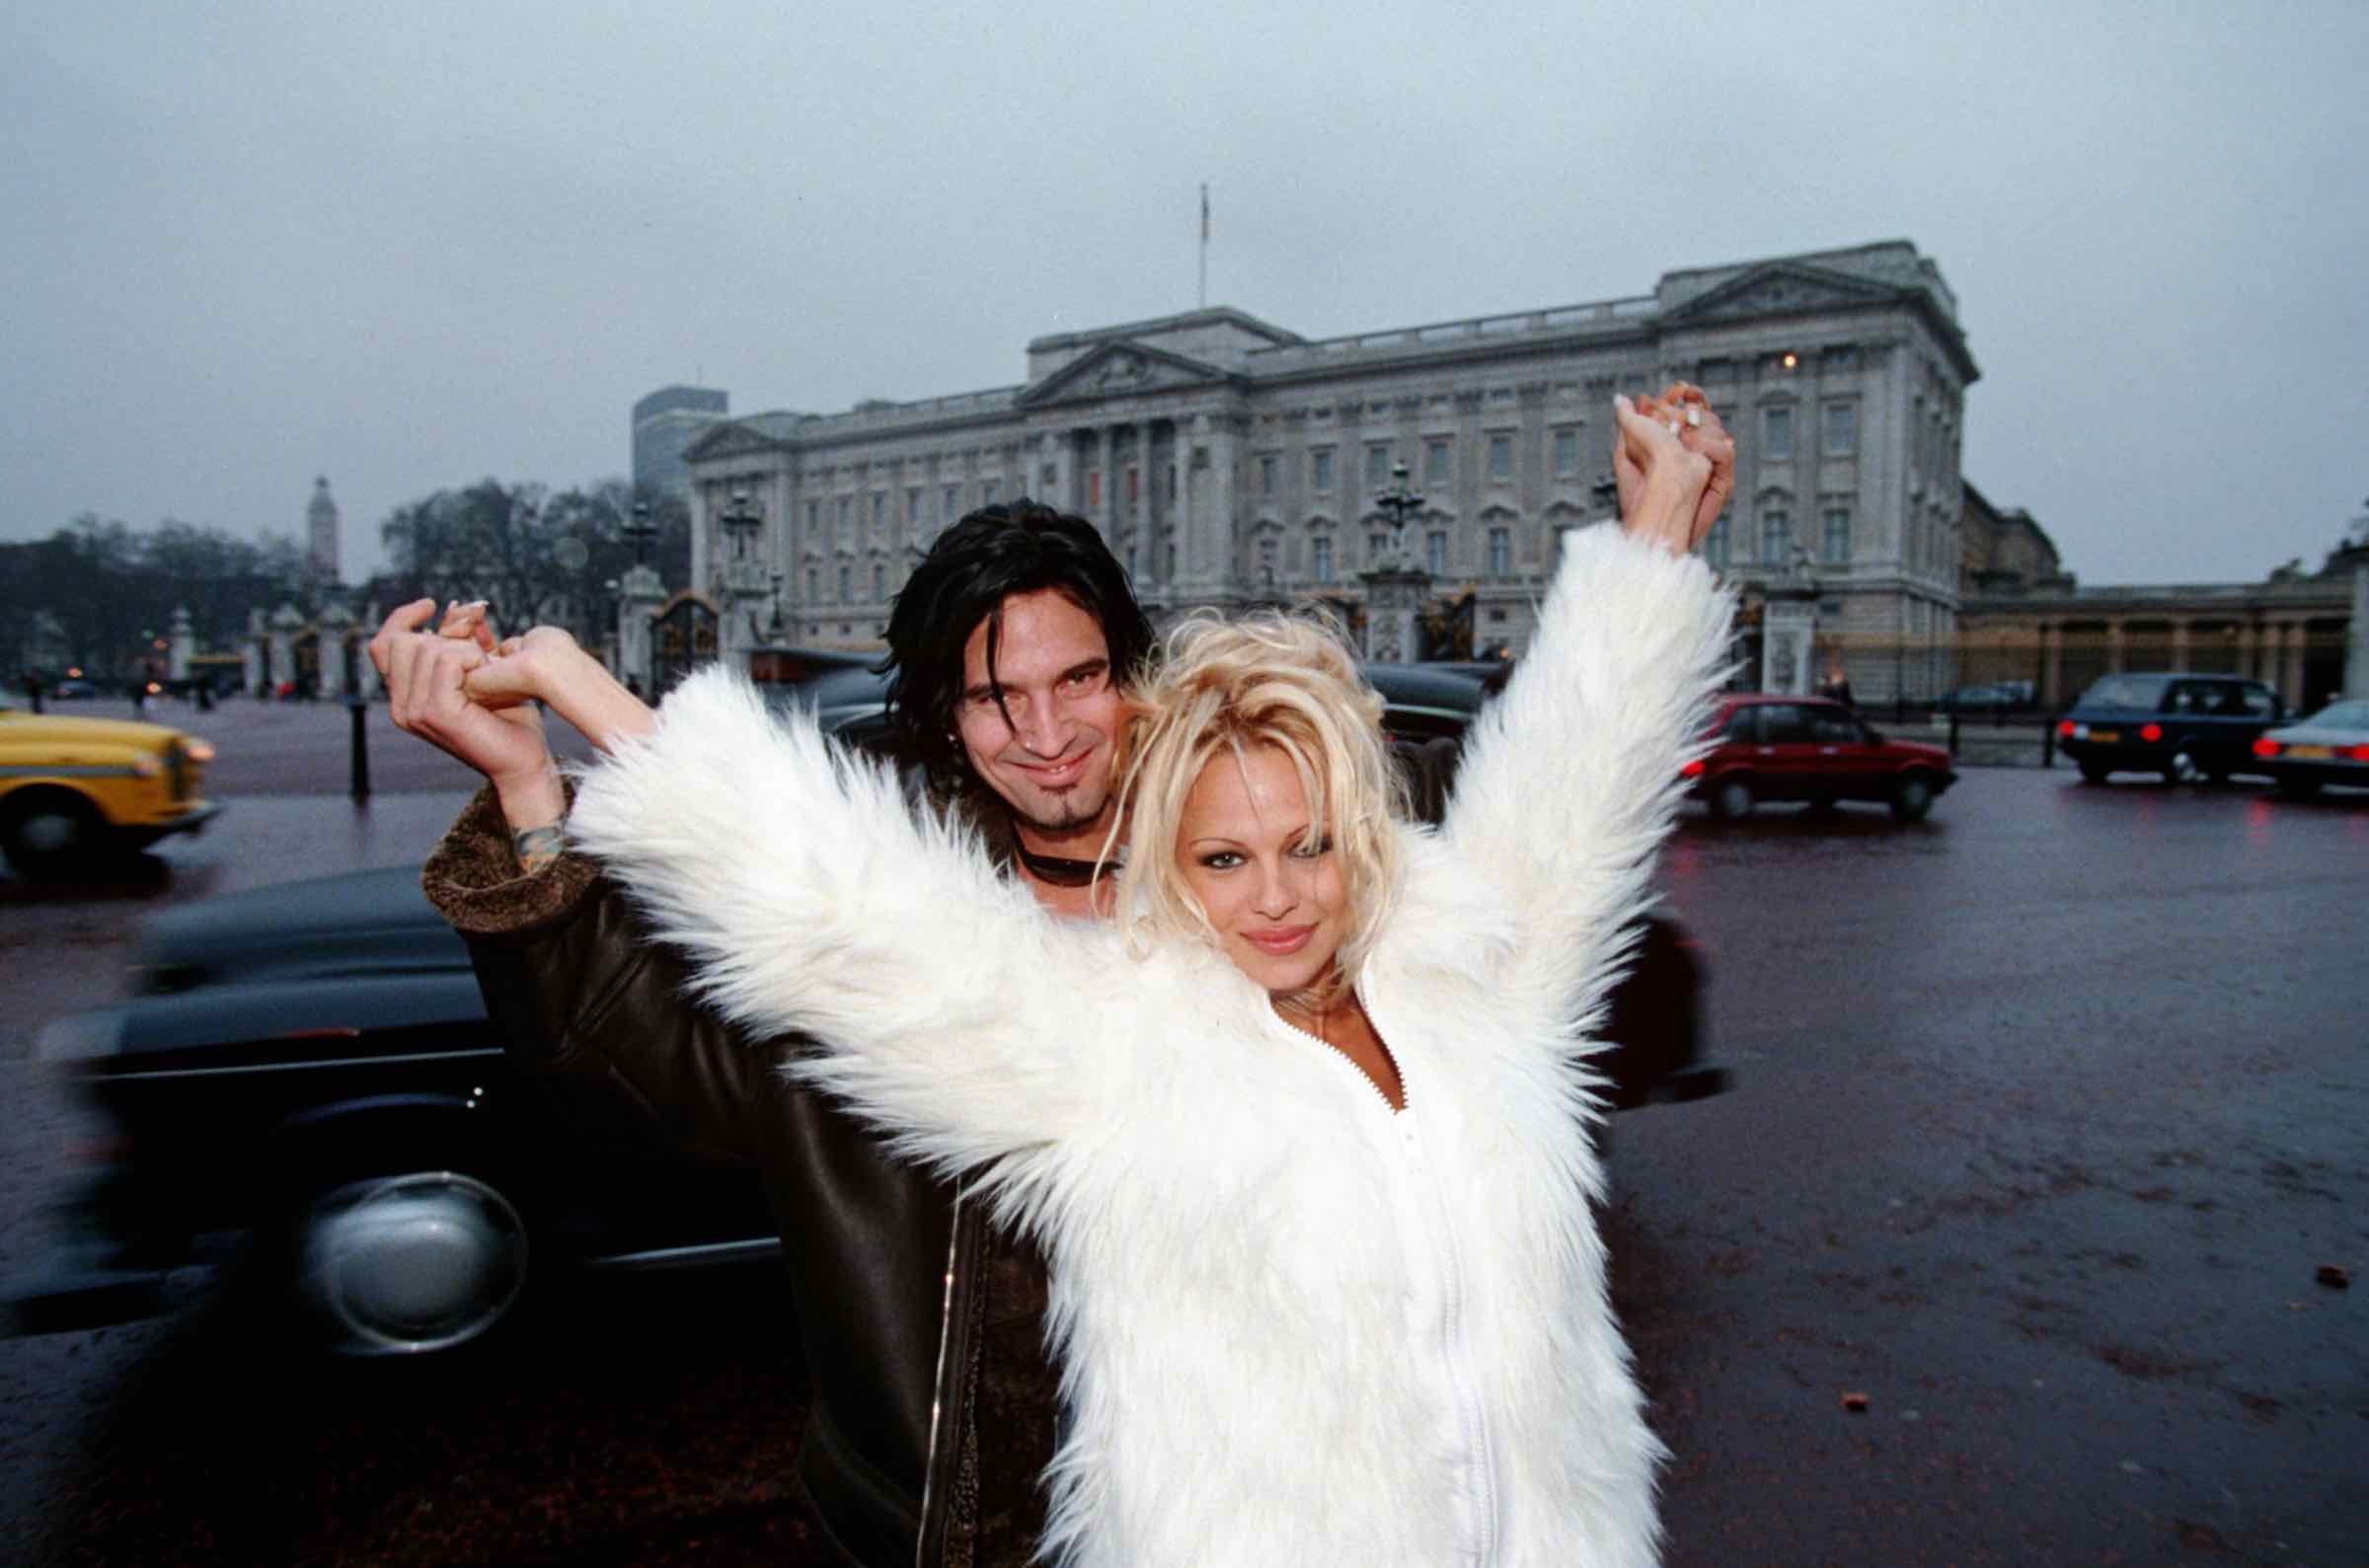 A pair that gets married after days of knowing each other is not likely to last. Was that the reason that made Tommy Lee and Pamela Anderson split?